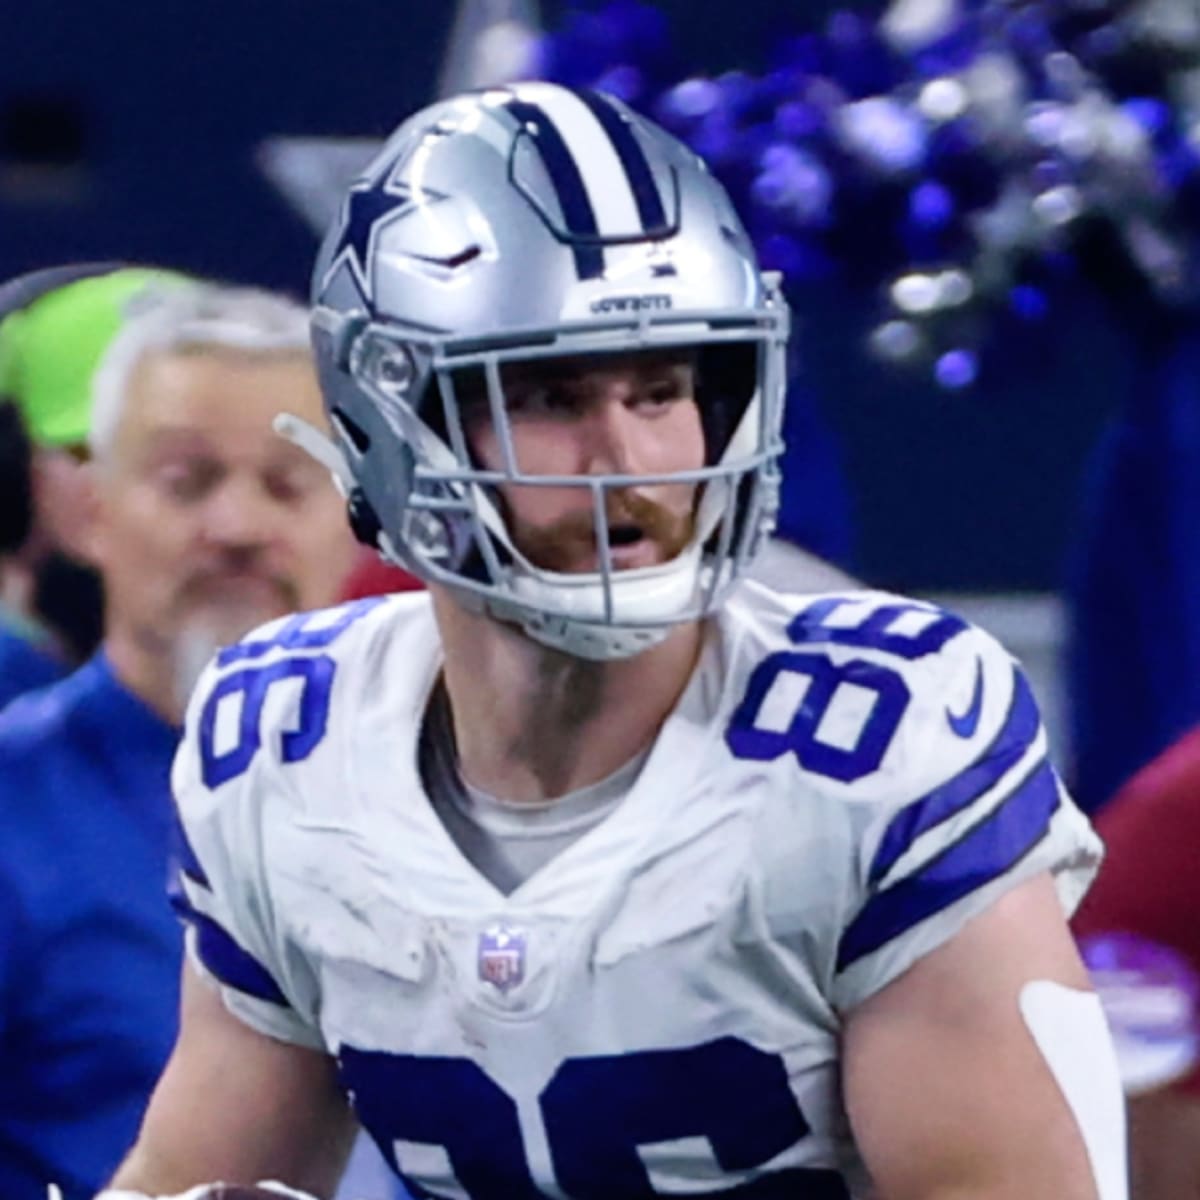 Dalton Schultz contract negotiations with Cowboys hit with update